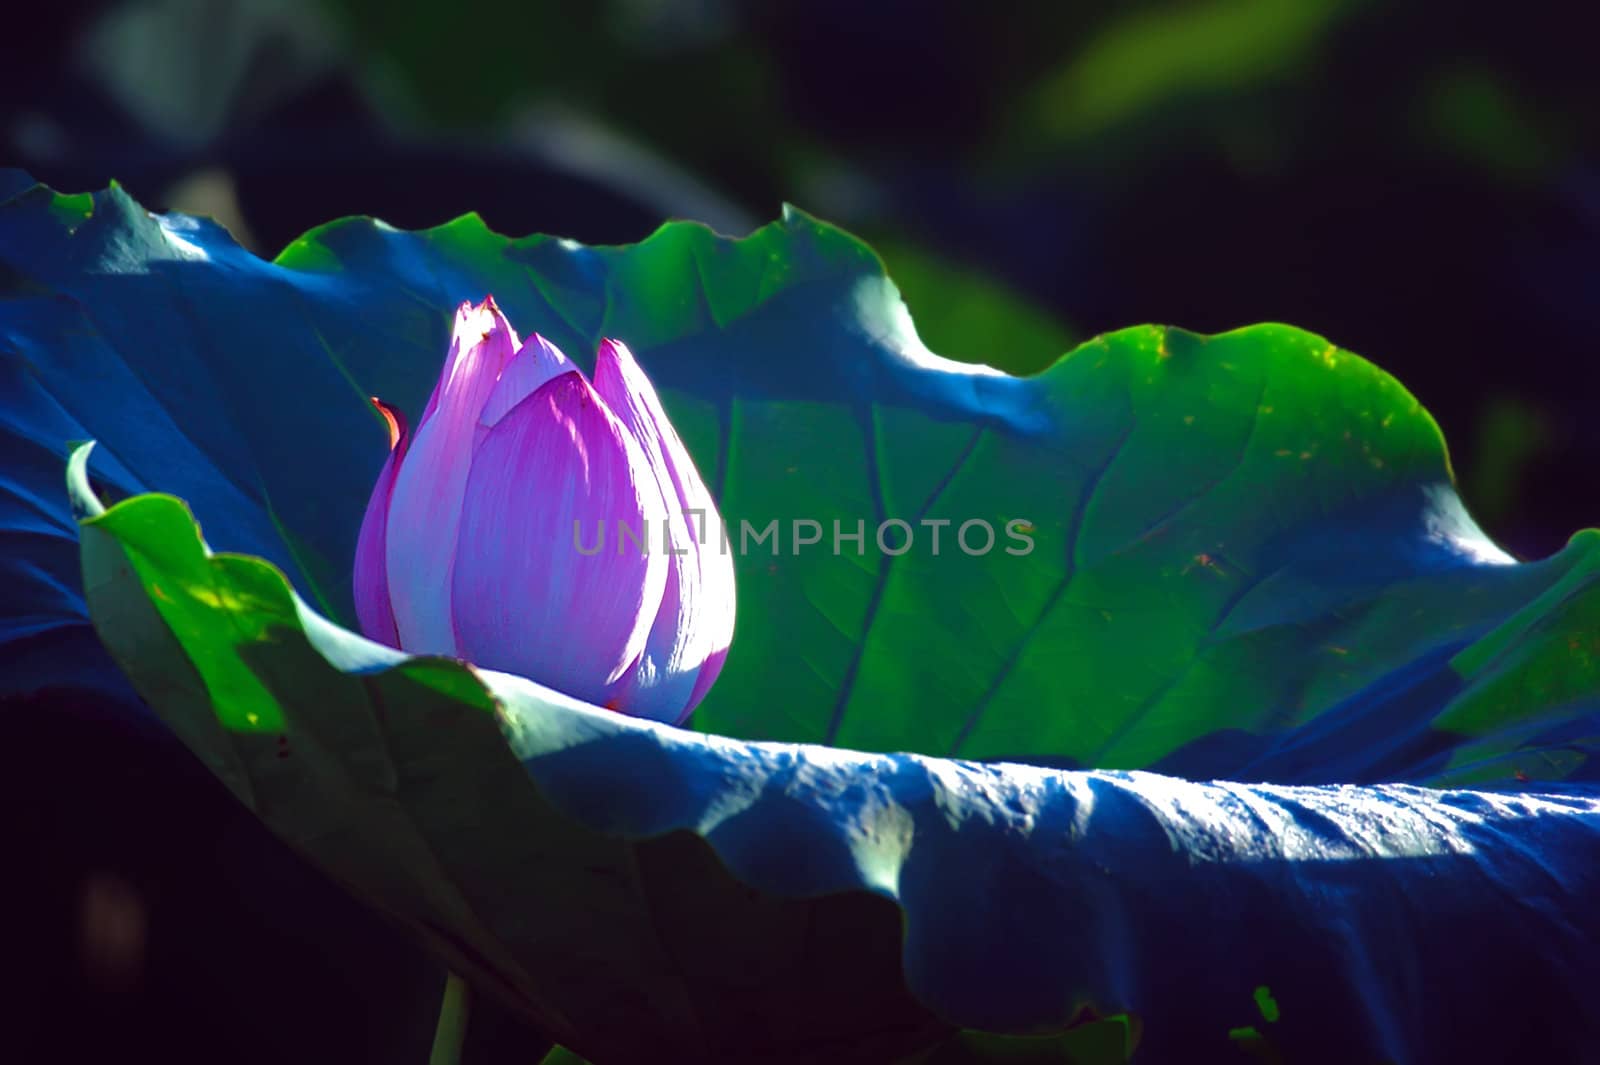 Lotus flower isolated on a black background Photo taken on: June, 2008